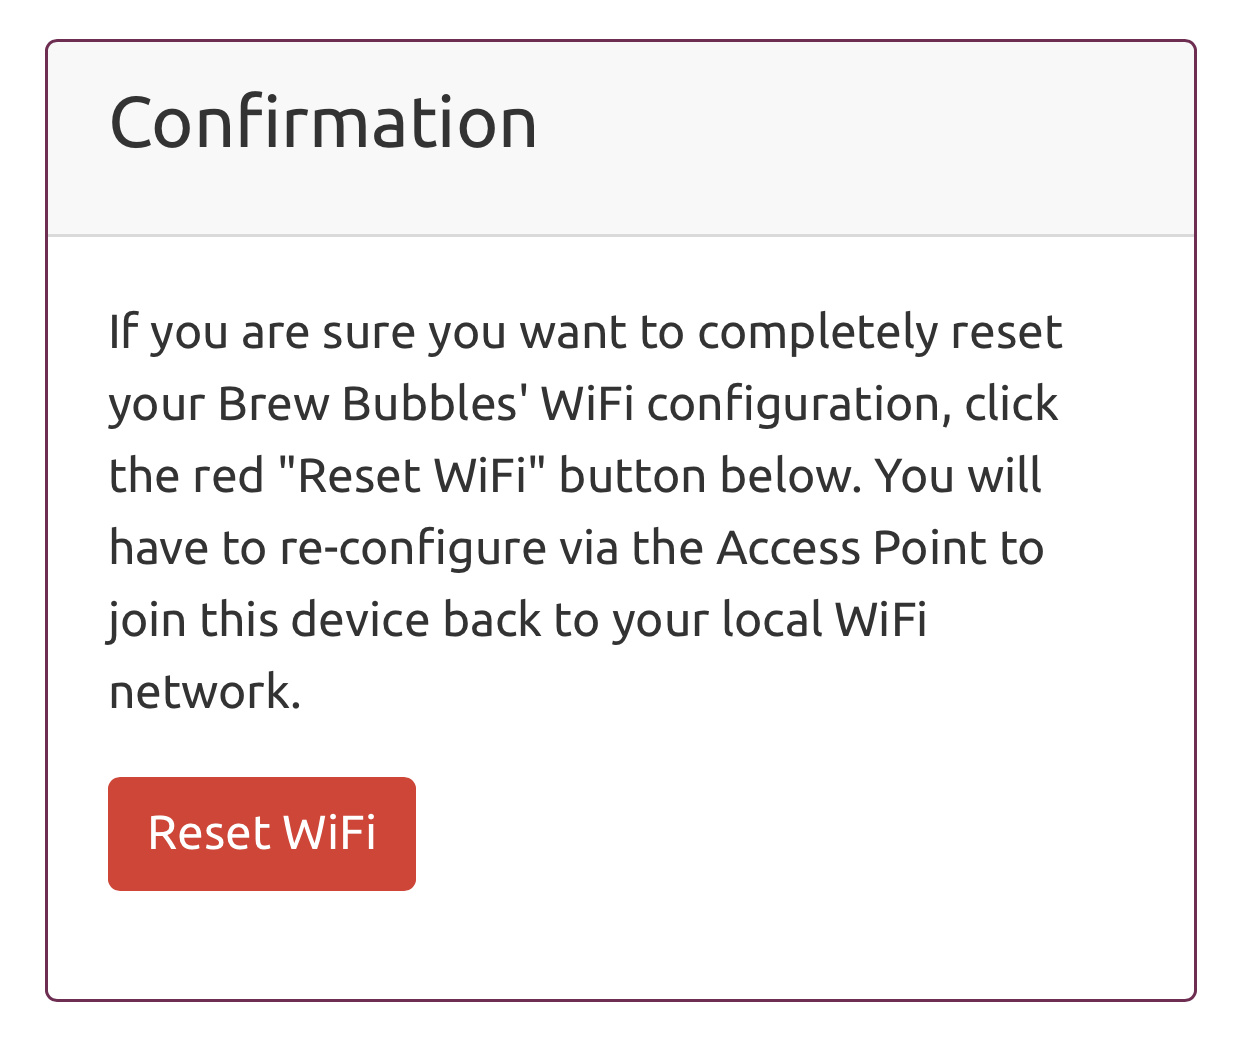 Reset Wifi confirmation